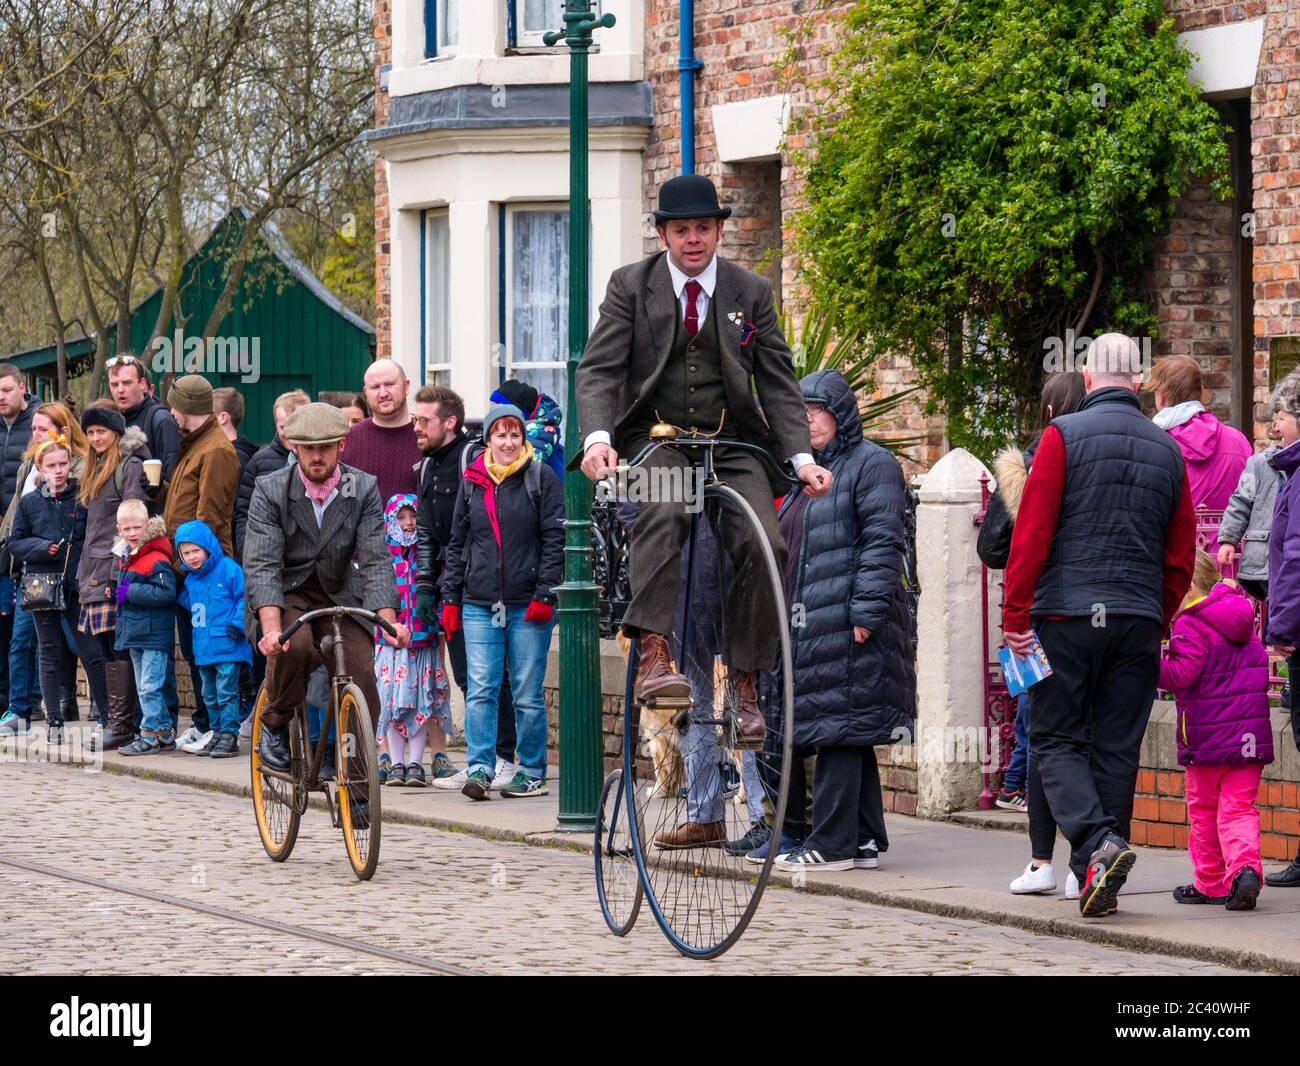 Man in period costume riding vintage penny farthing old fashioned bicycle in 1900s town, Beamish Museum, Durham County, England, UK Stock Photo